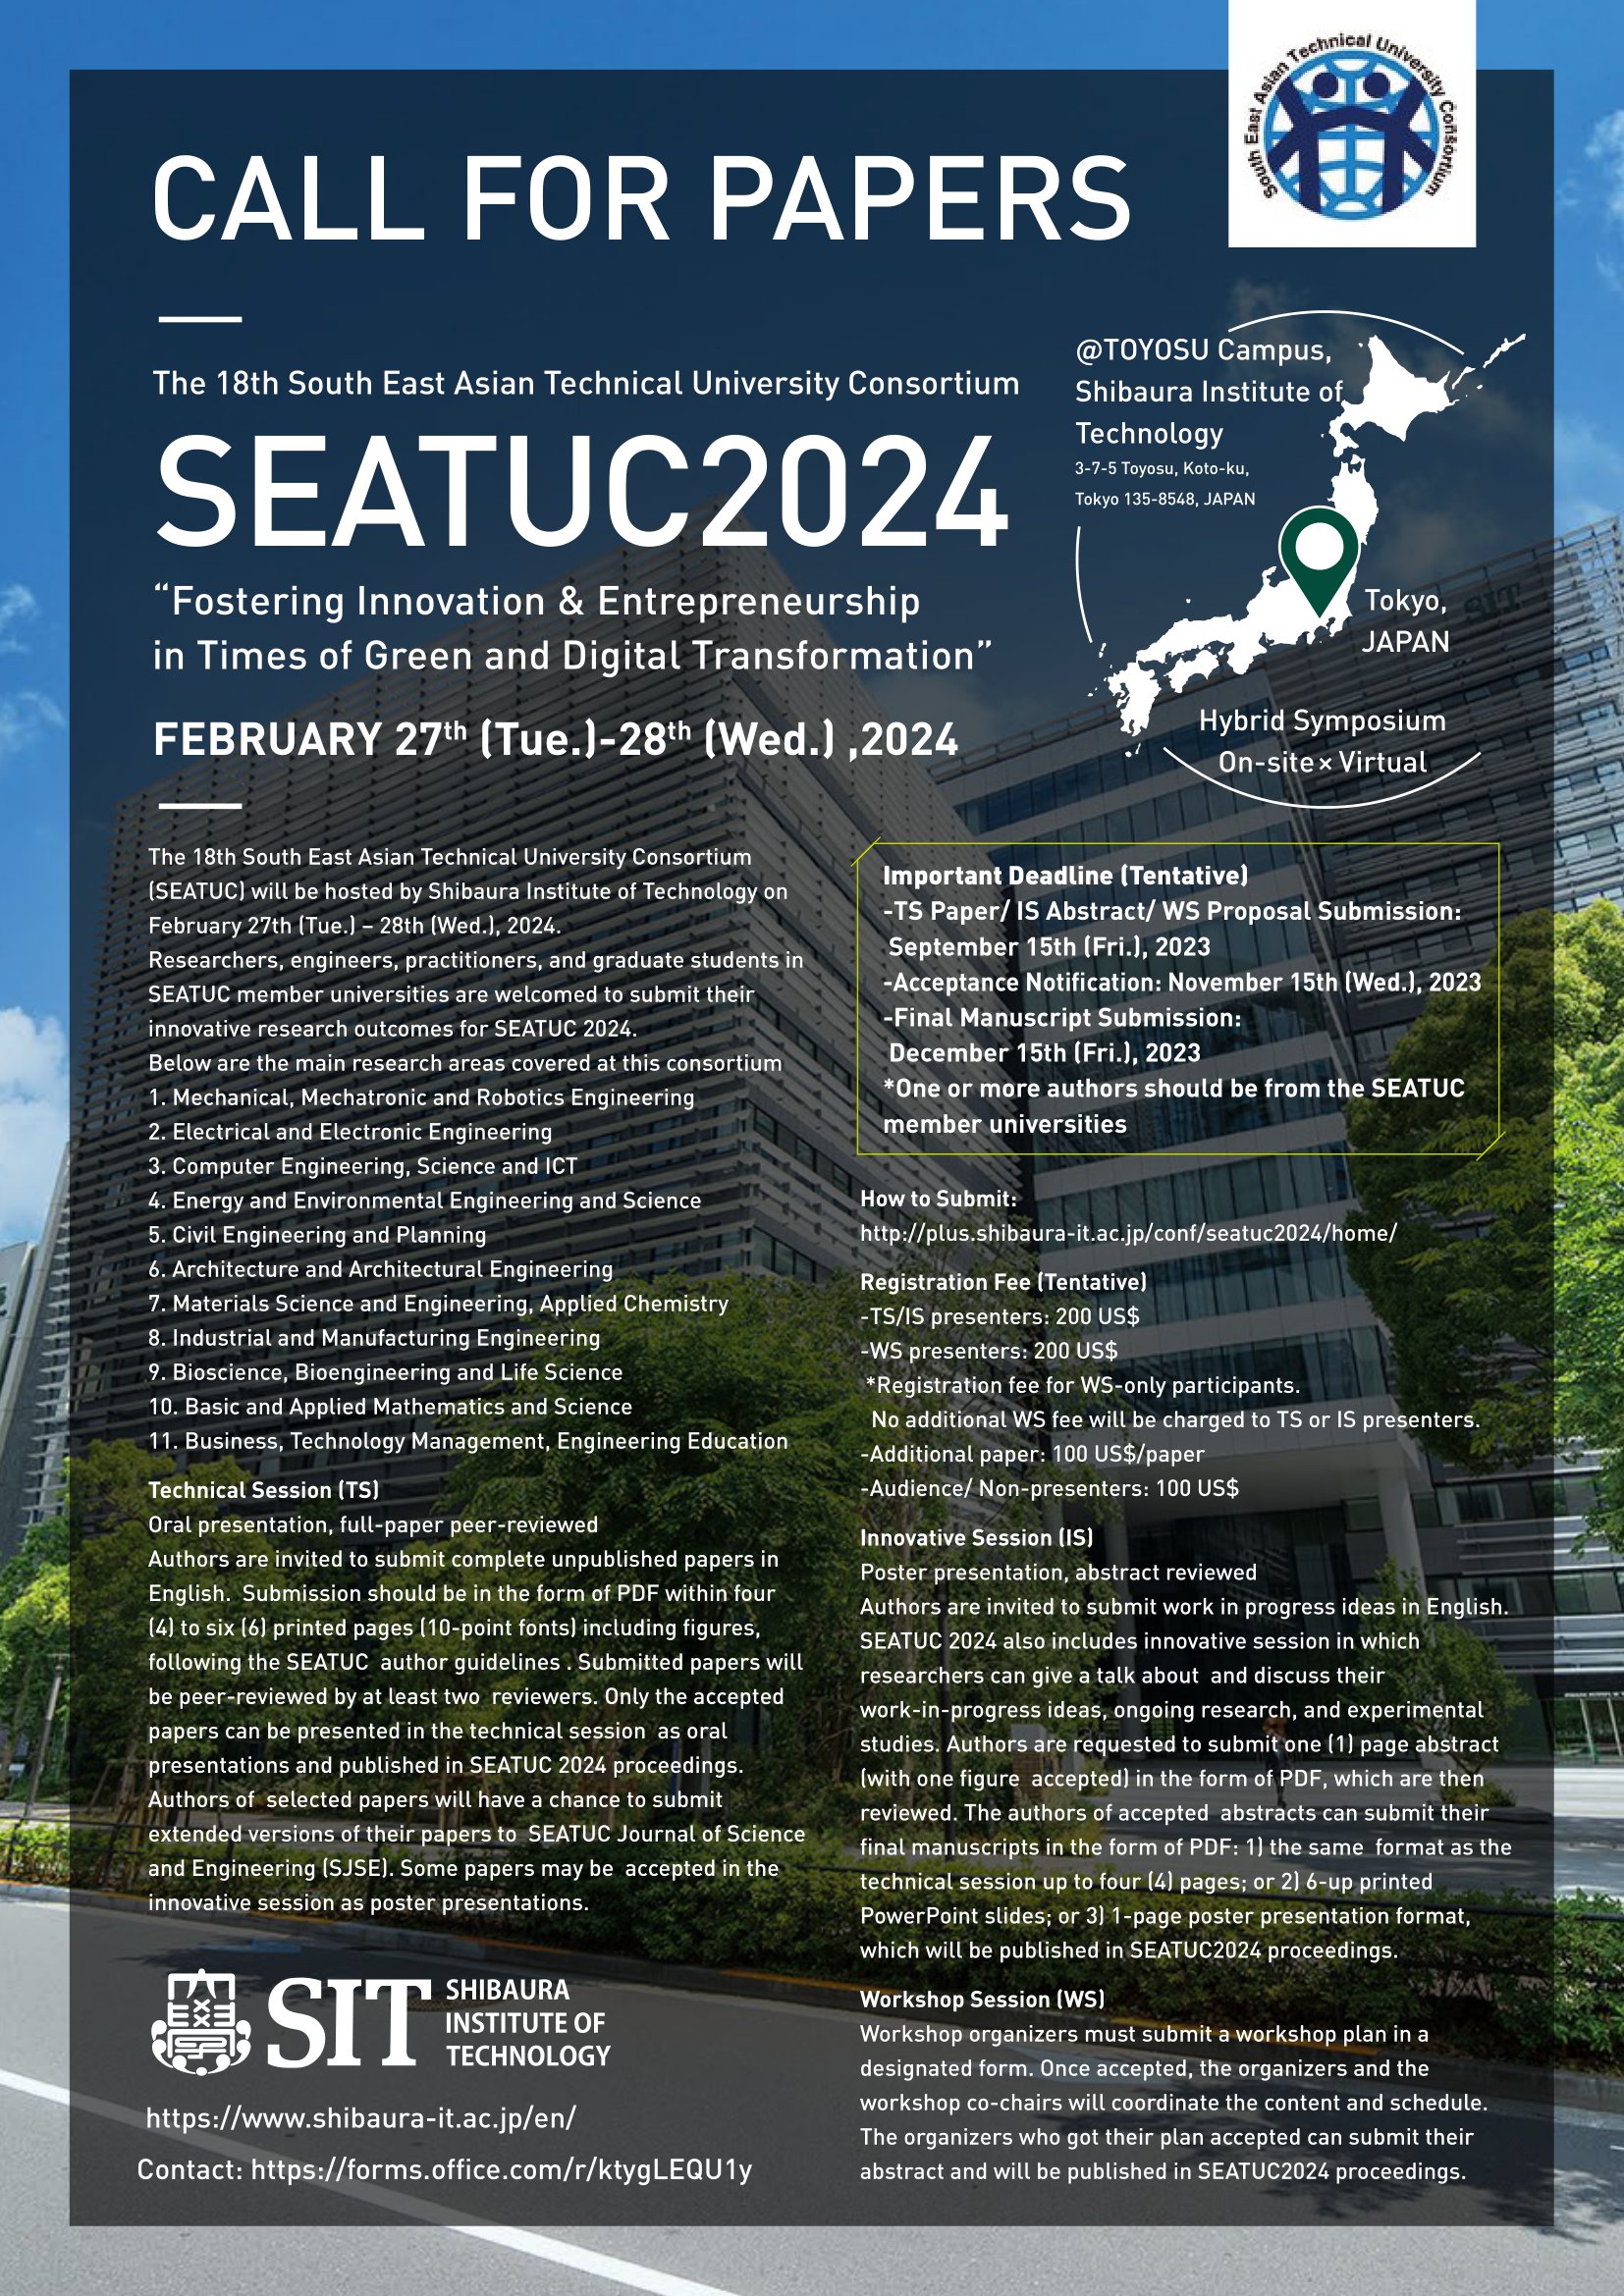 SEATUC2024：Call for Papers　Submission by September 15th, 2023